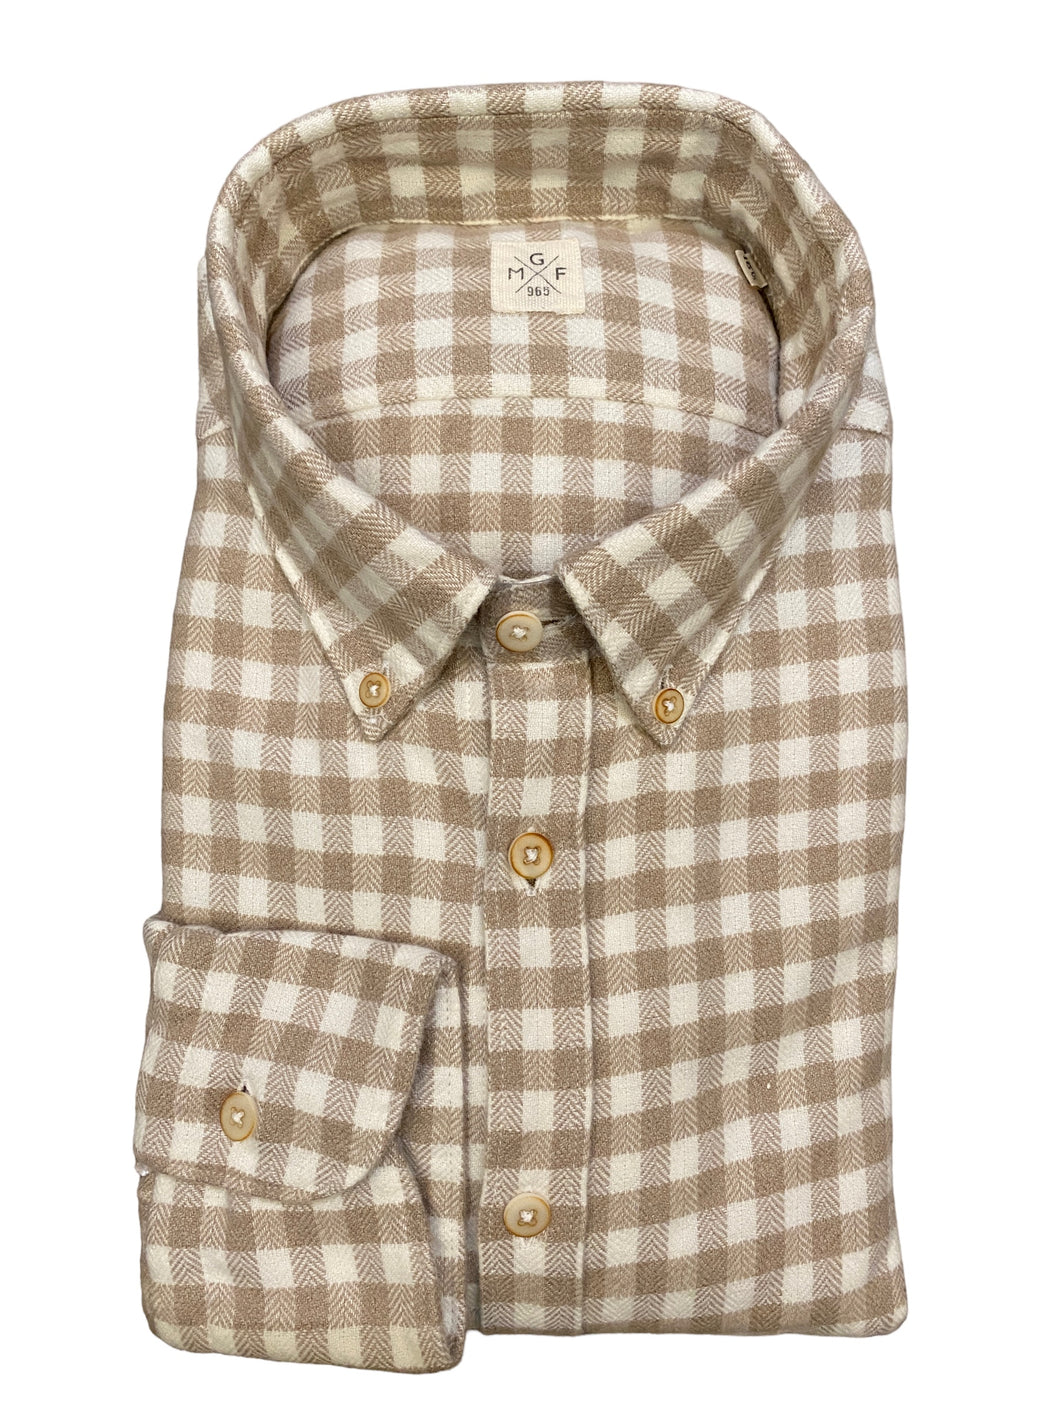 GMF 965 Flannel Gingham Shirt Camel/White